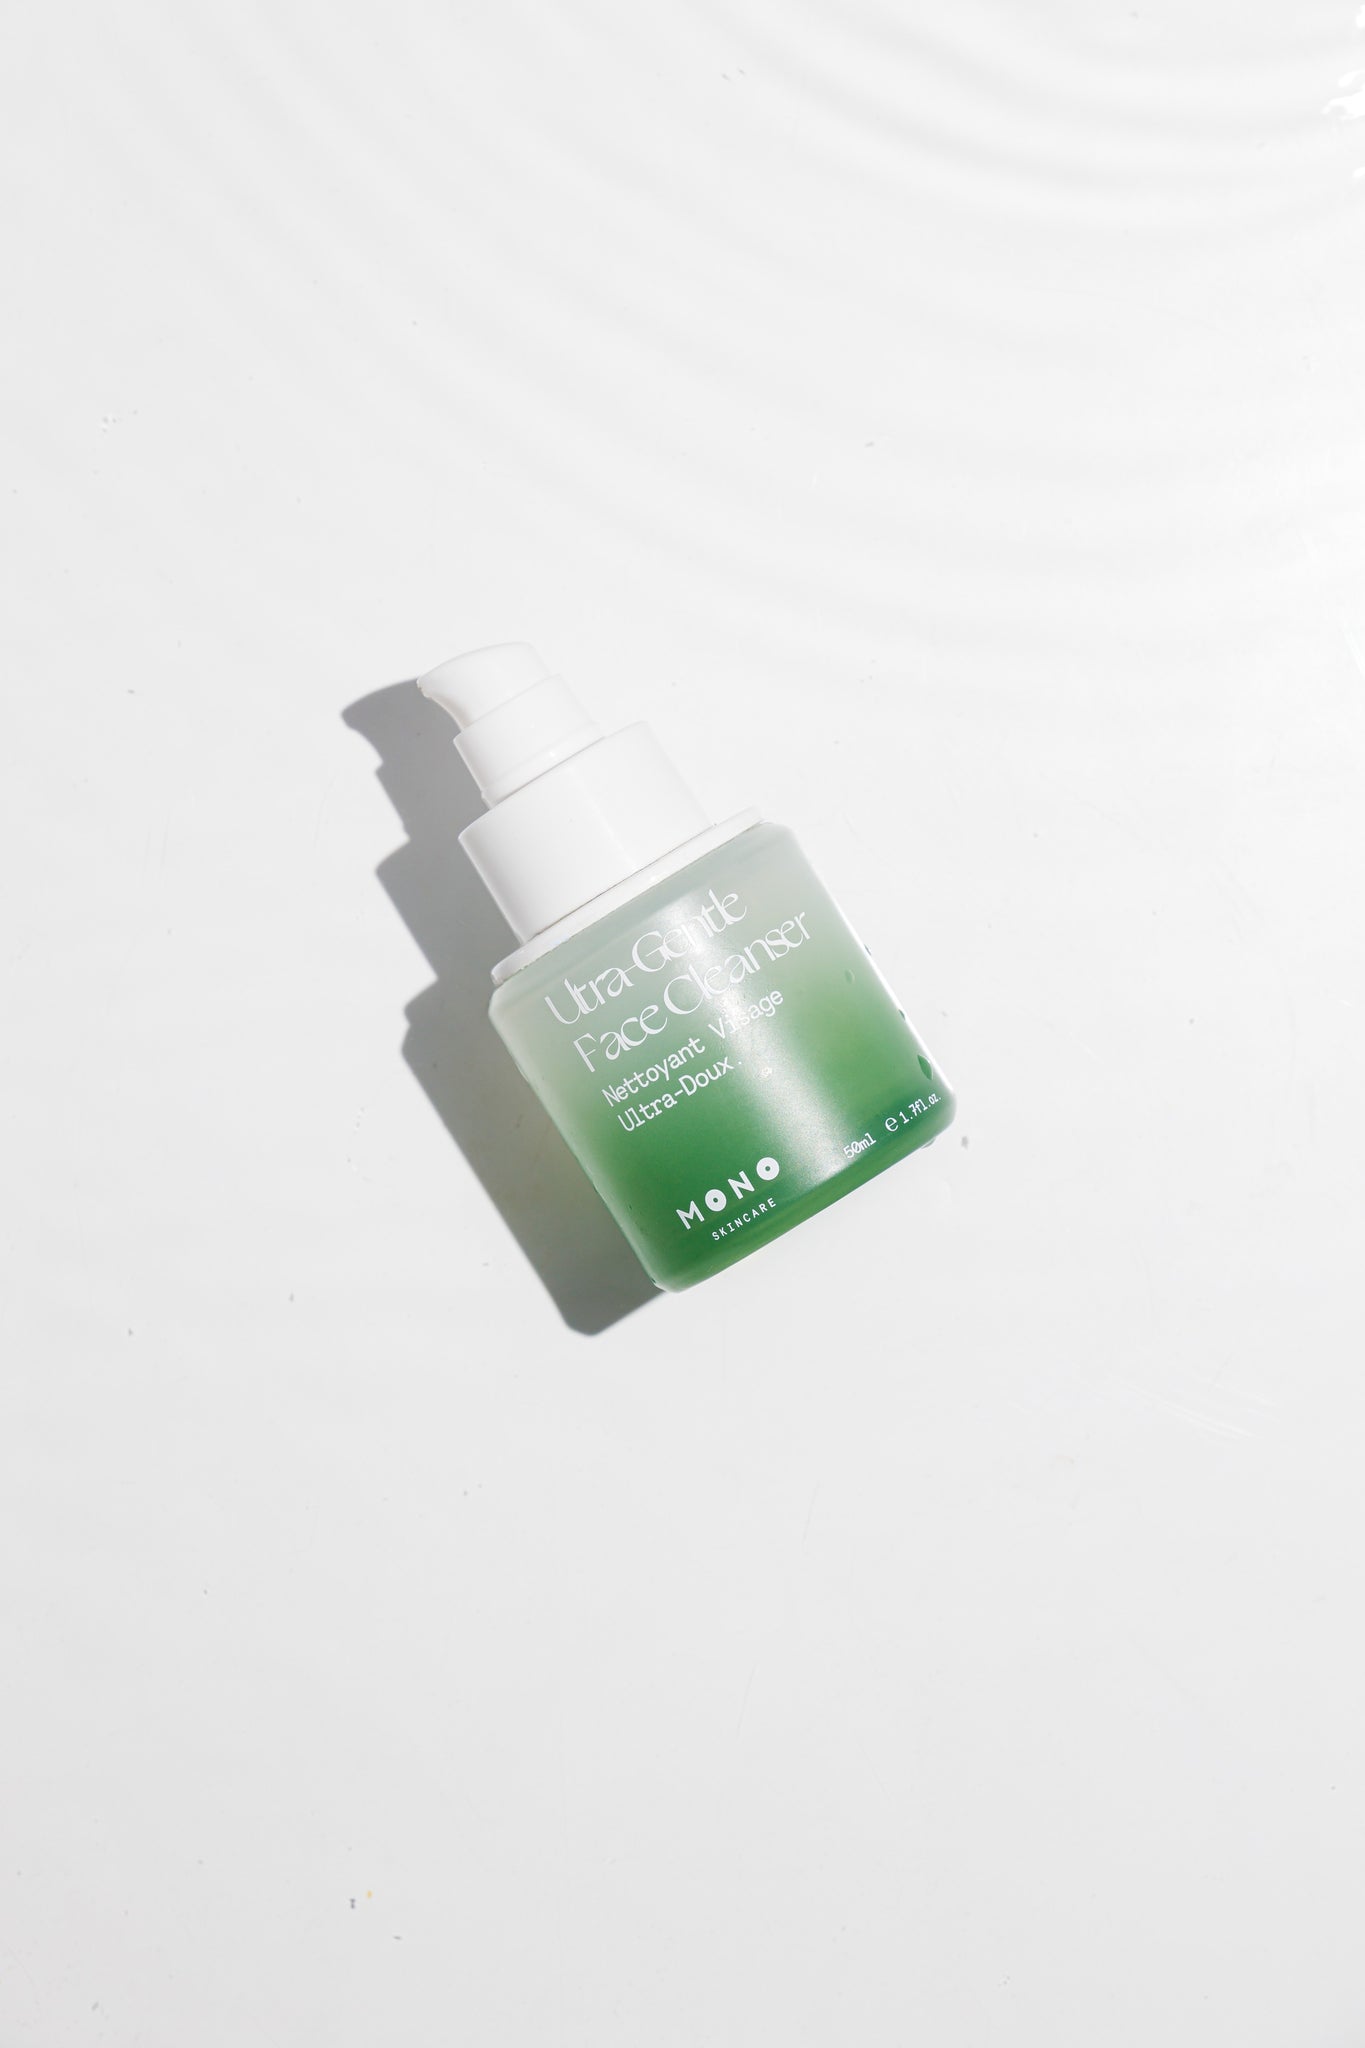 N°1  Ultra-Gentle Face Cleanser - Mono Skincare